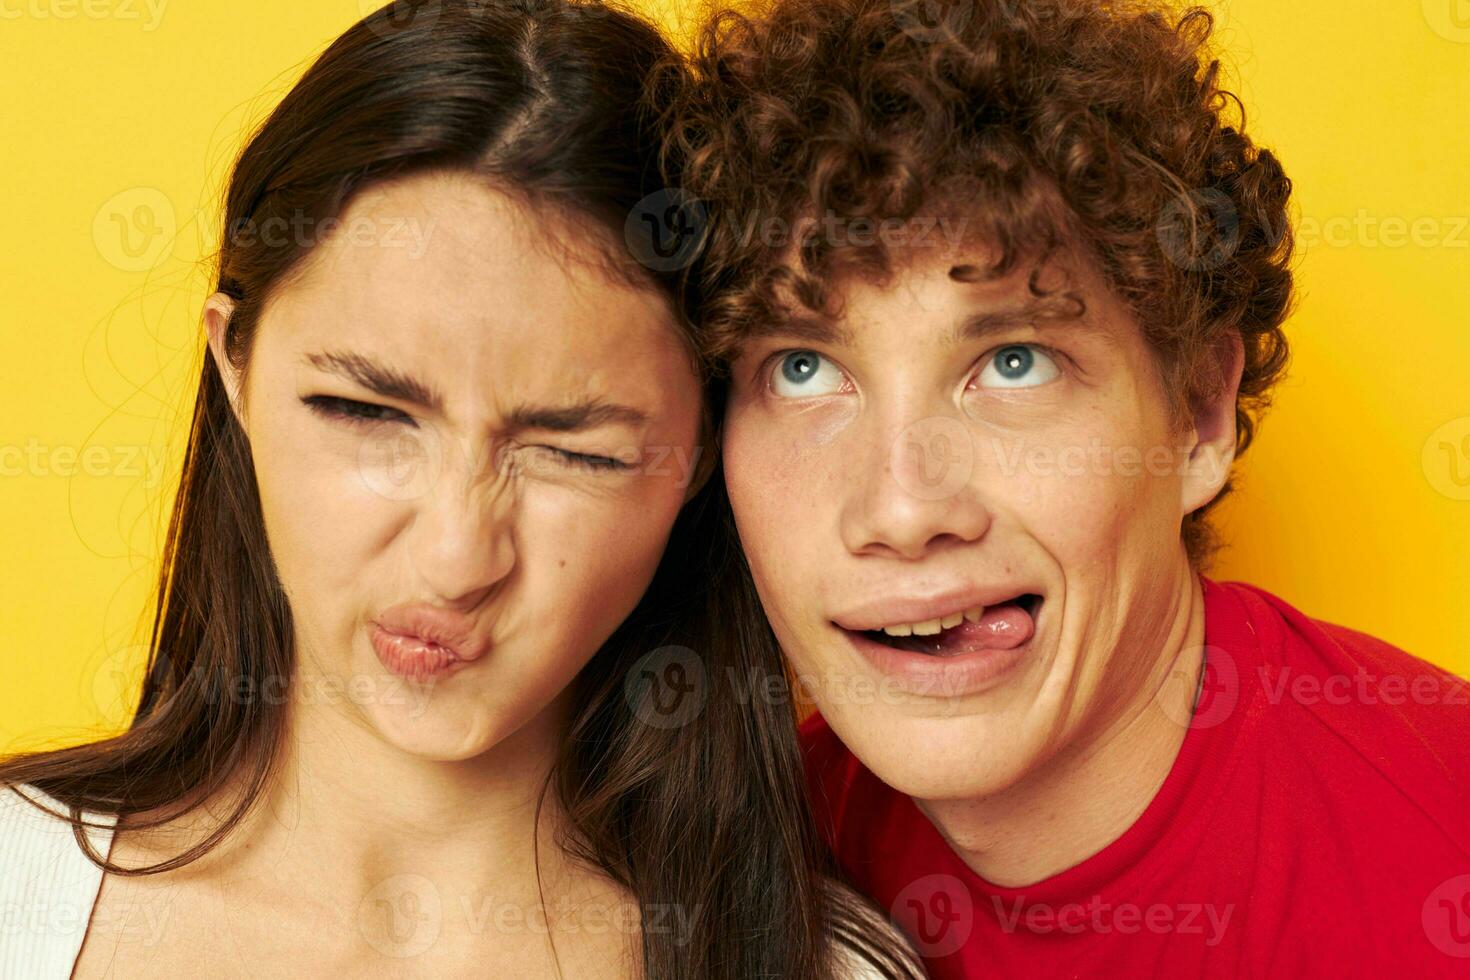 young boy and girl together posing emotions close-up yellow background unaltered photo